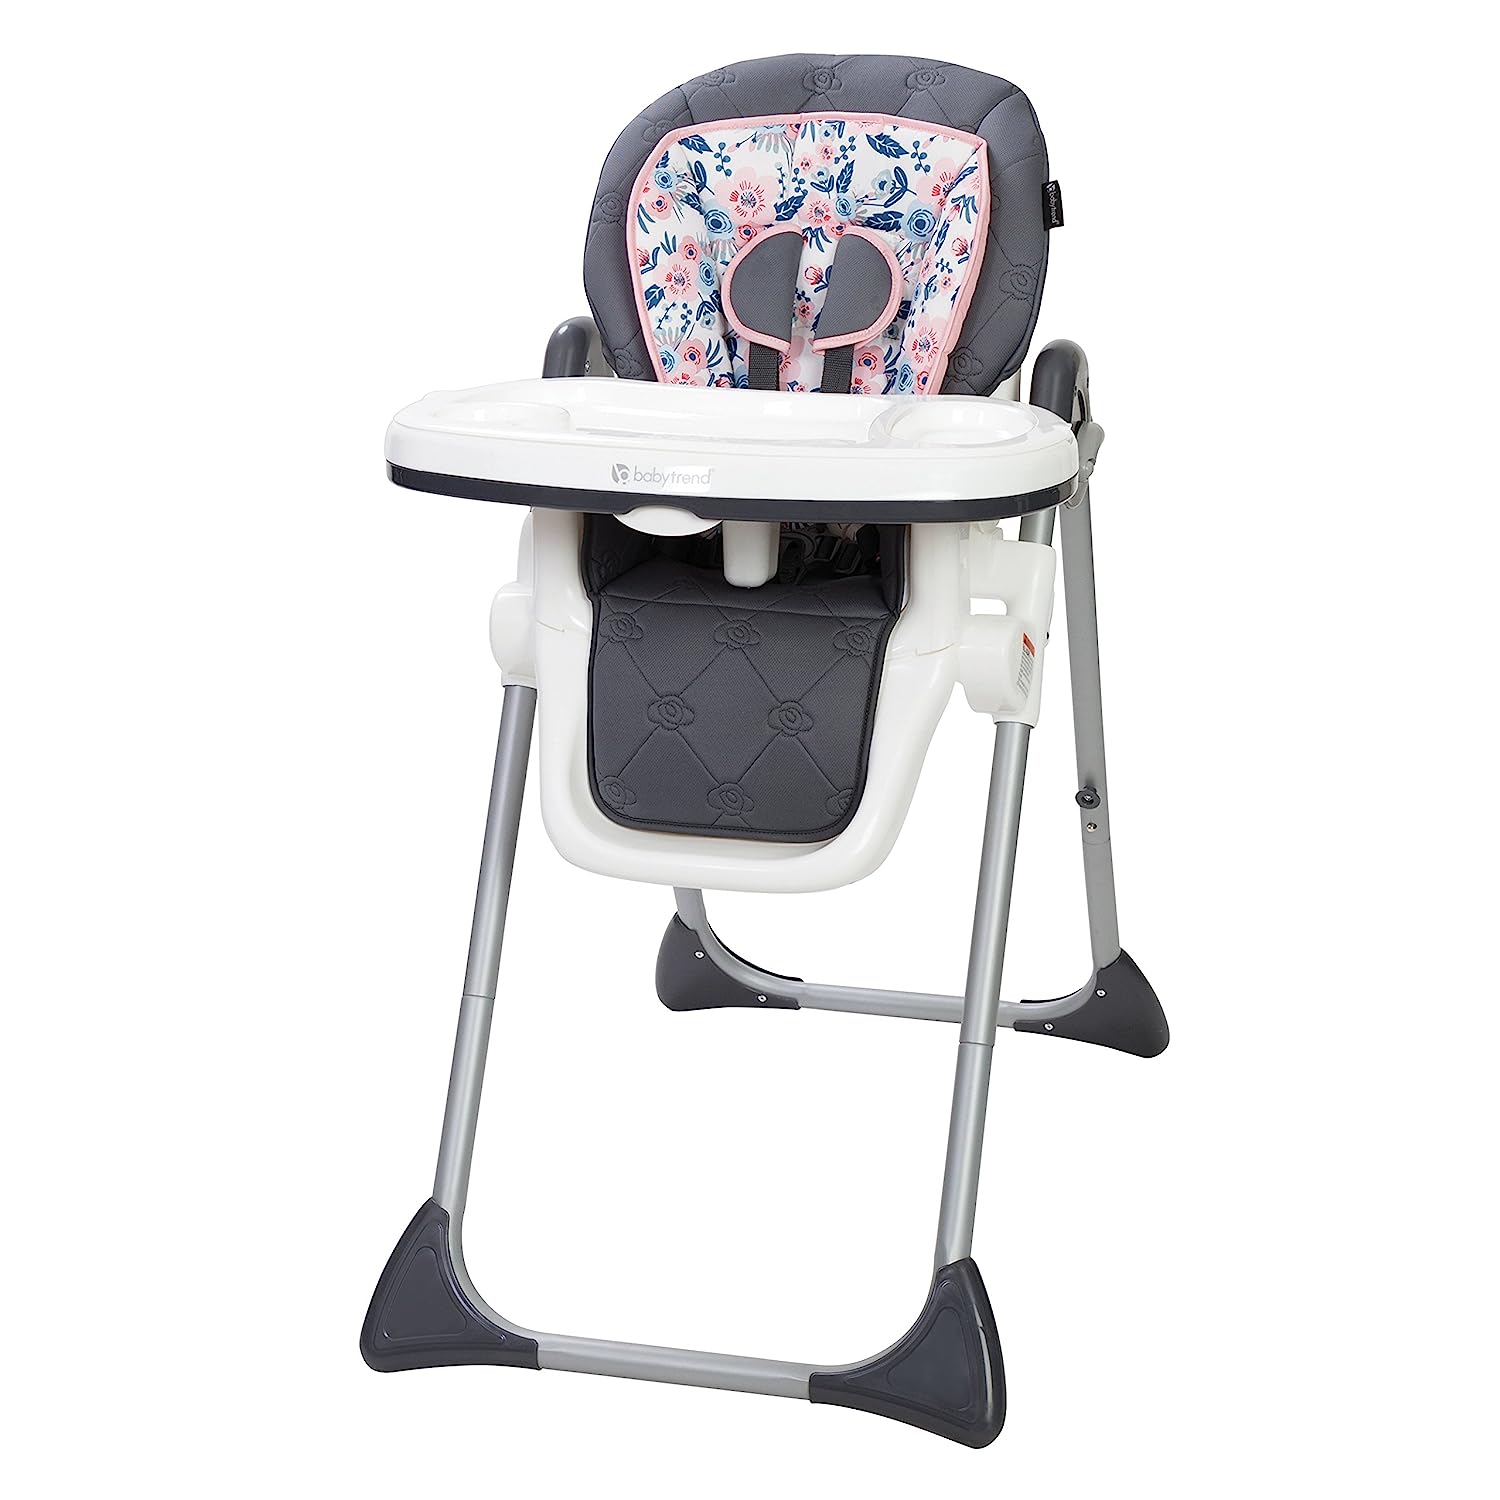 Baby Trend Tot Spot 3-in-1 High Chair (Bluebell) $50 + Free Shipping